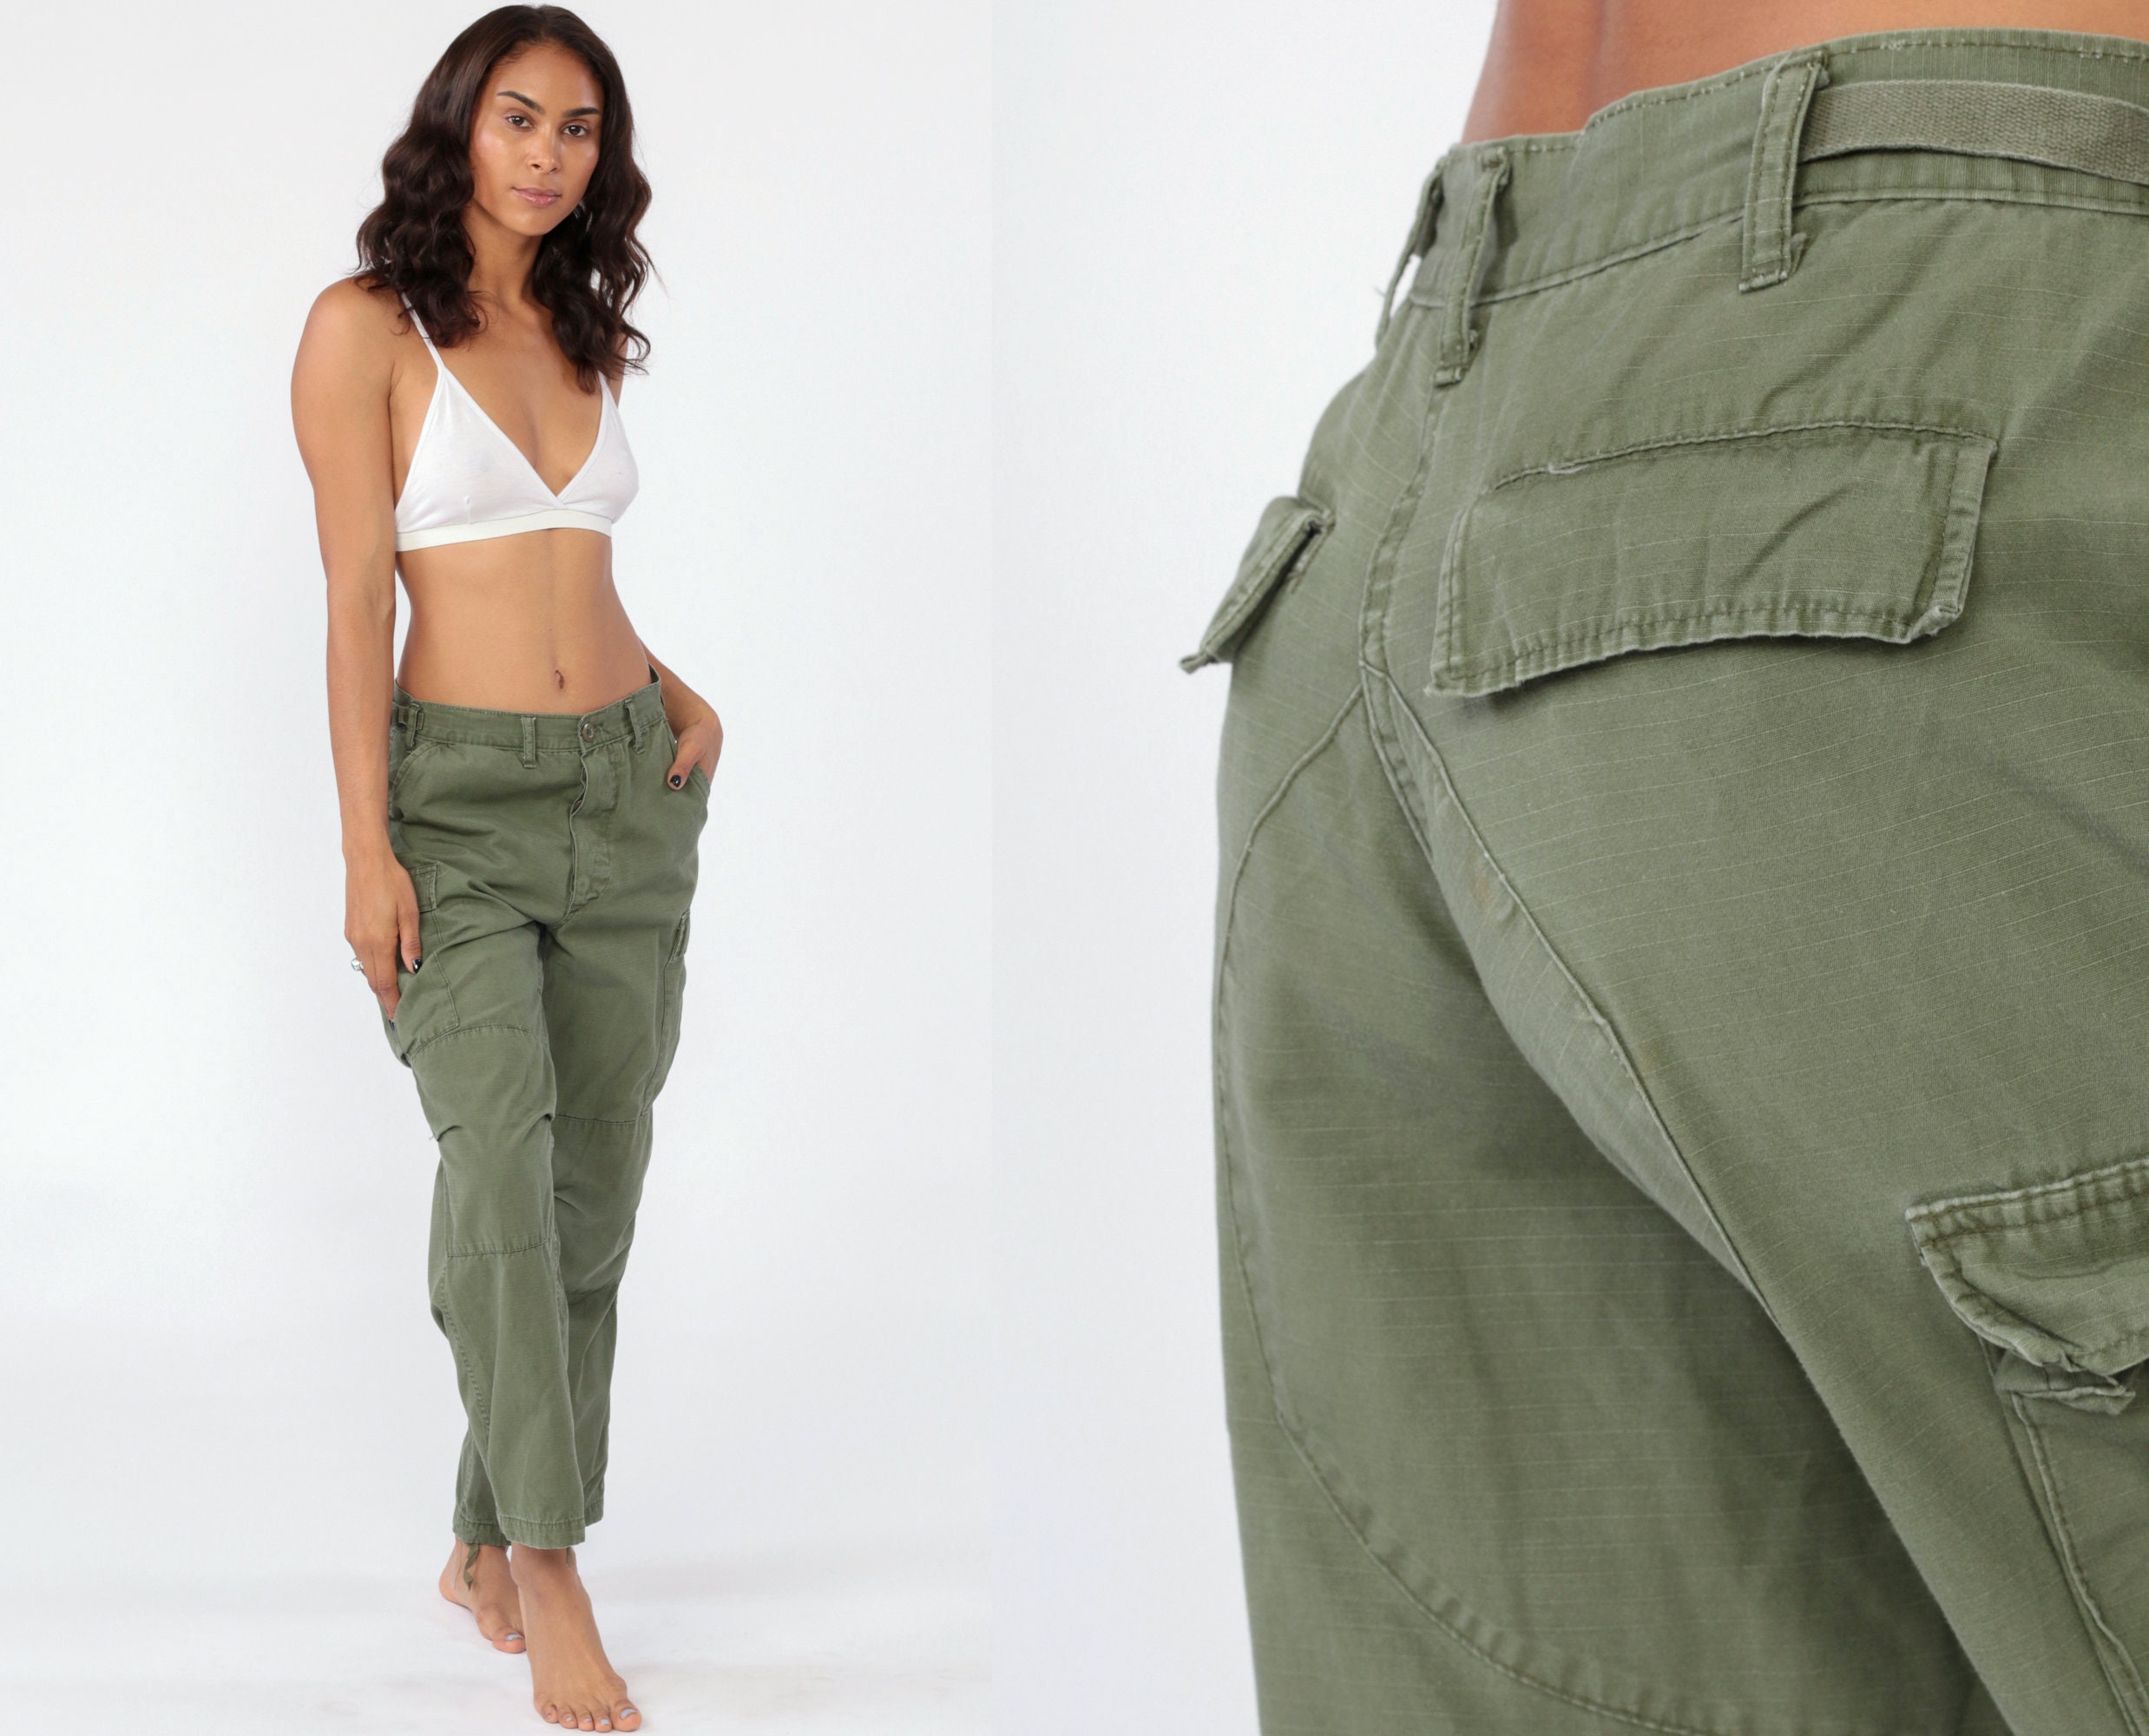 olive green army pants